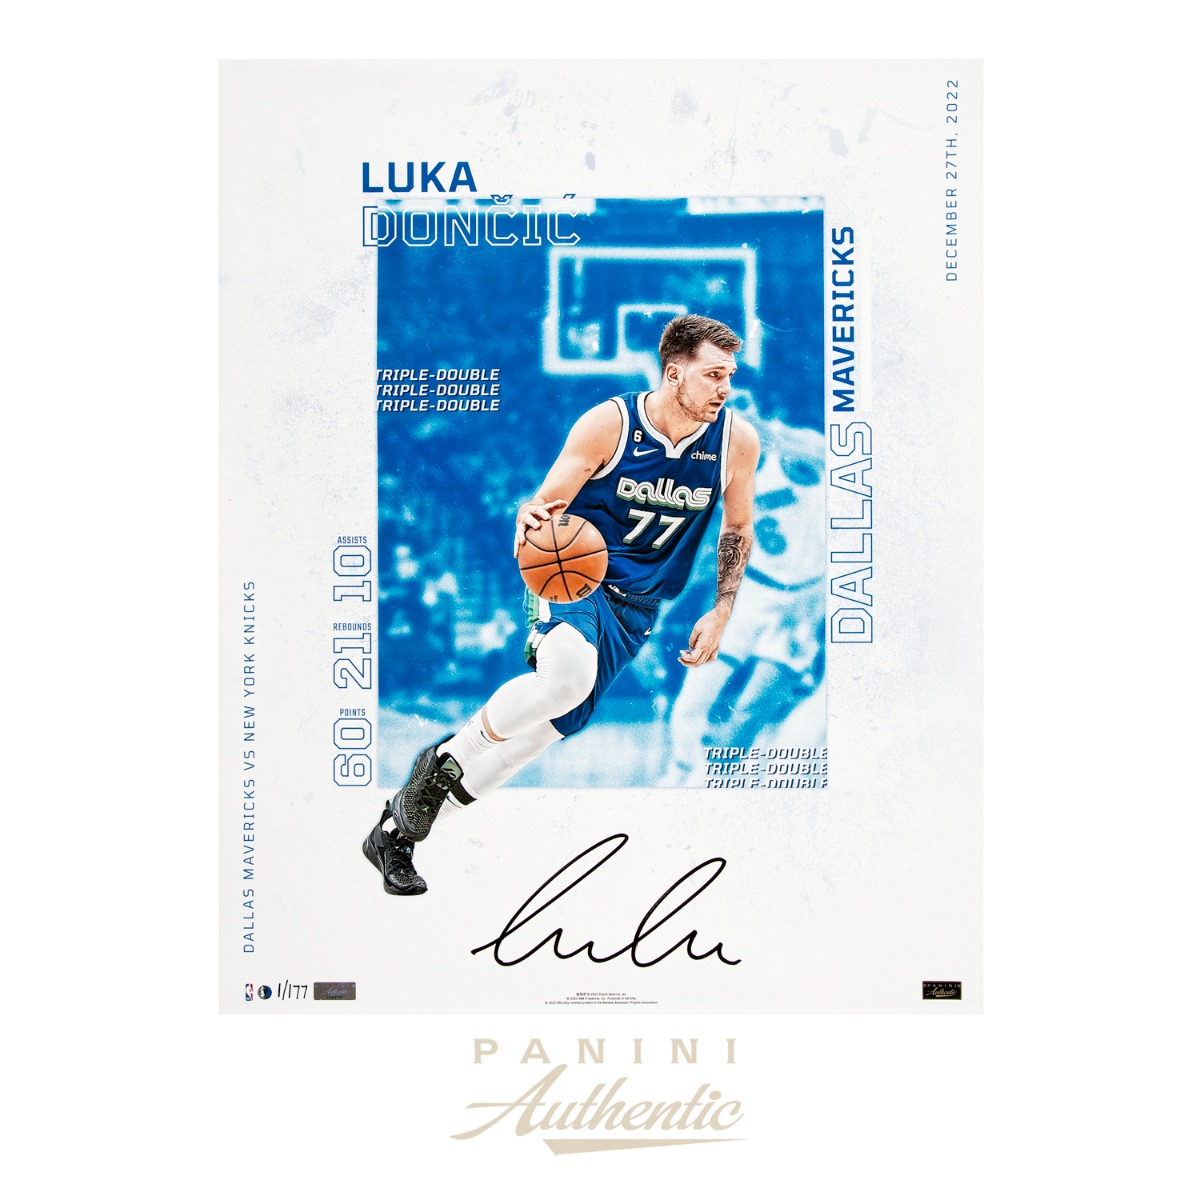 Luka Doncic Autographed 16x20 